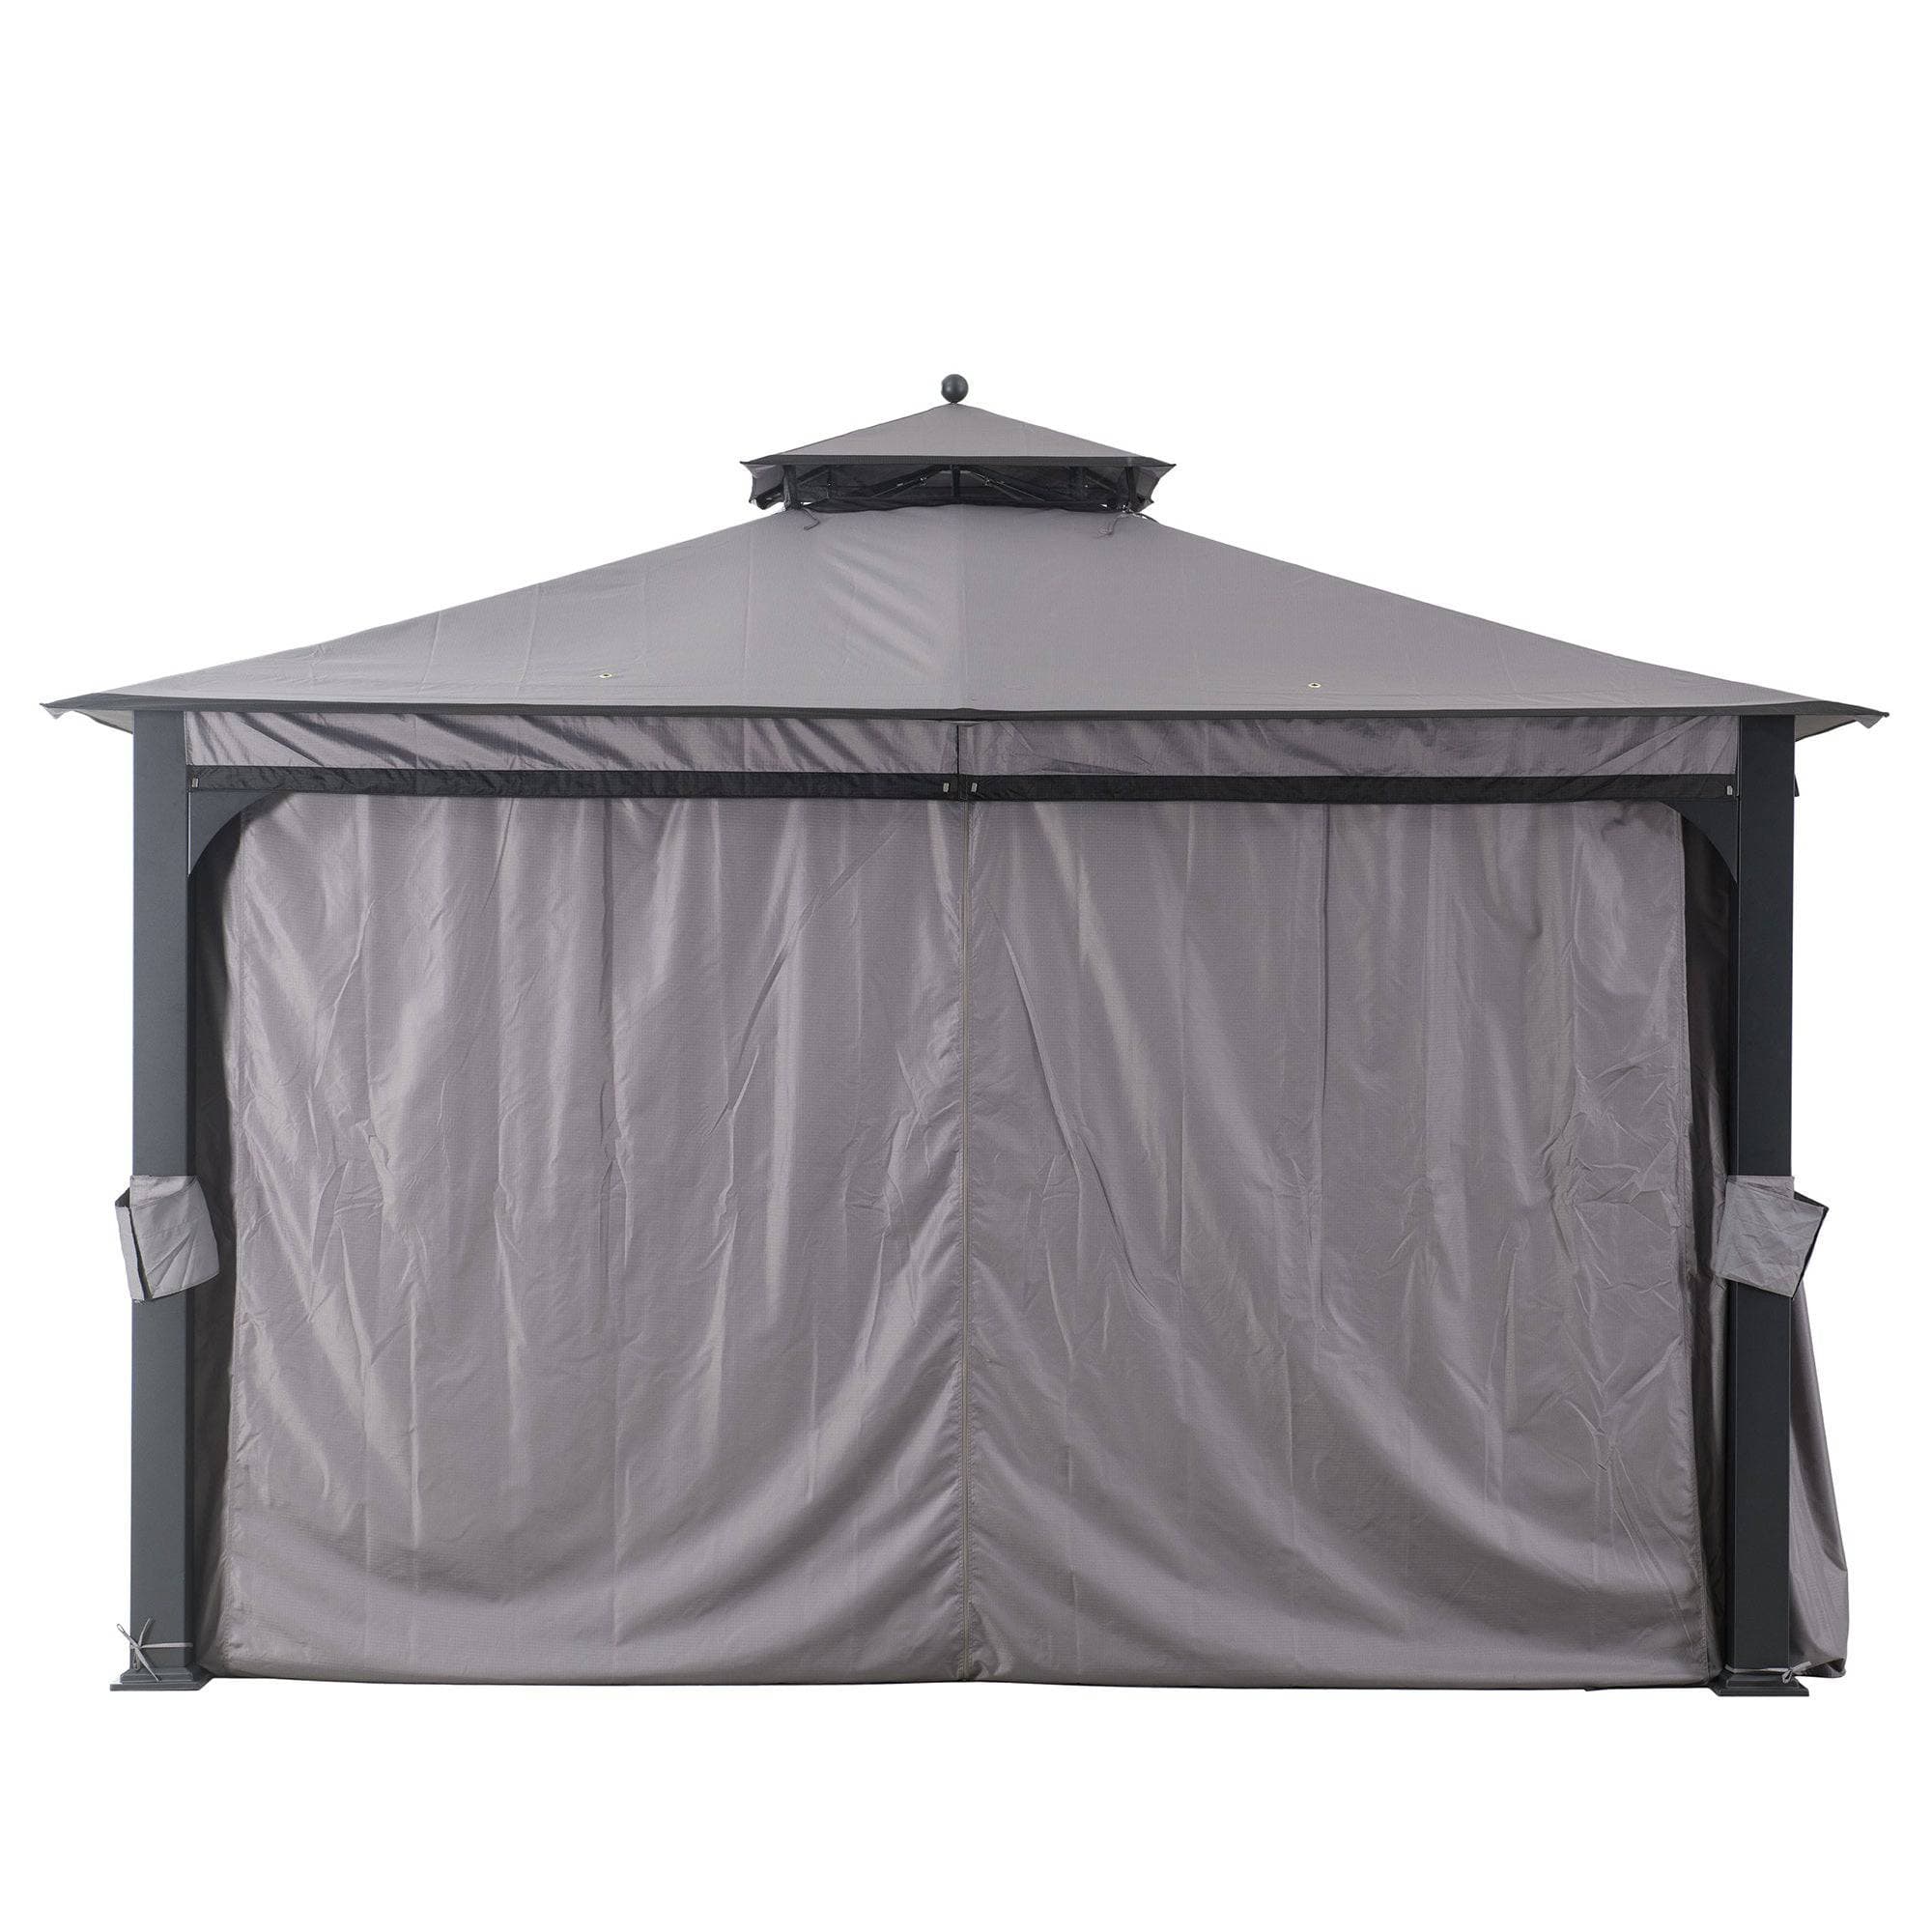 Sunjoy Dark Gray+Black Replacement Curtain For Soft Top Gazebo (10X12 Ft) L-GZ1140PST-G Sold At Lowe's